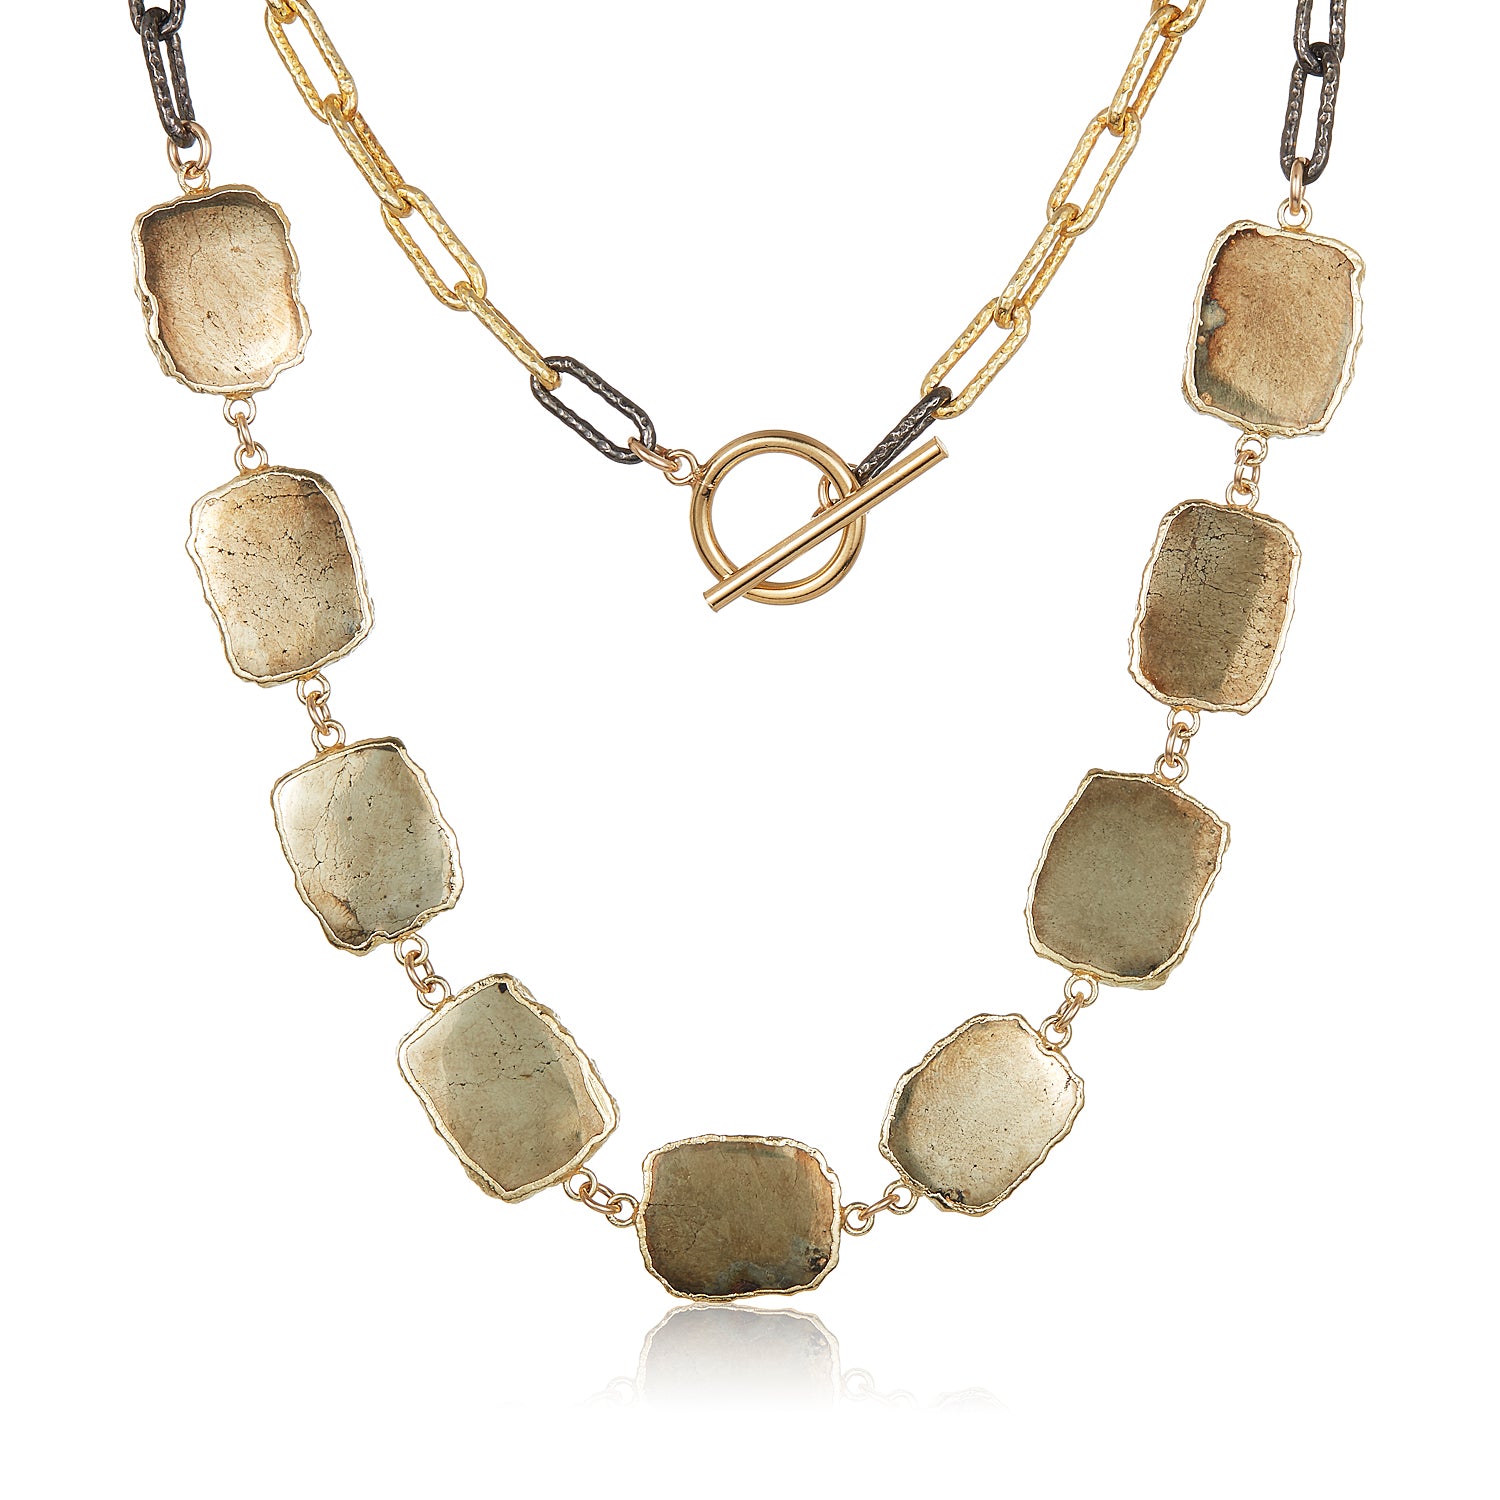 Links of Pyrite Necklace